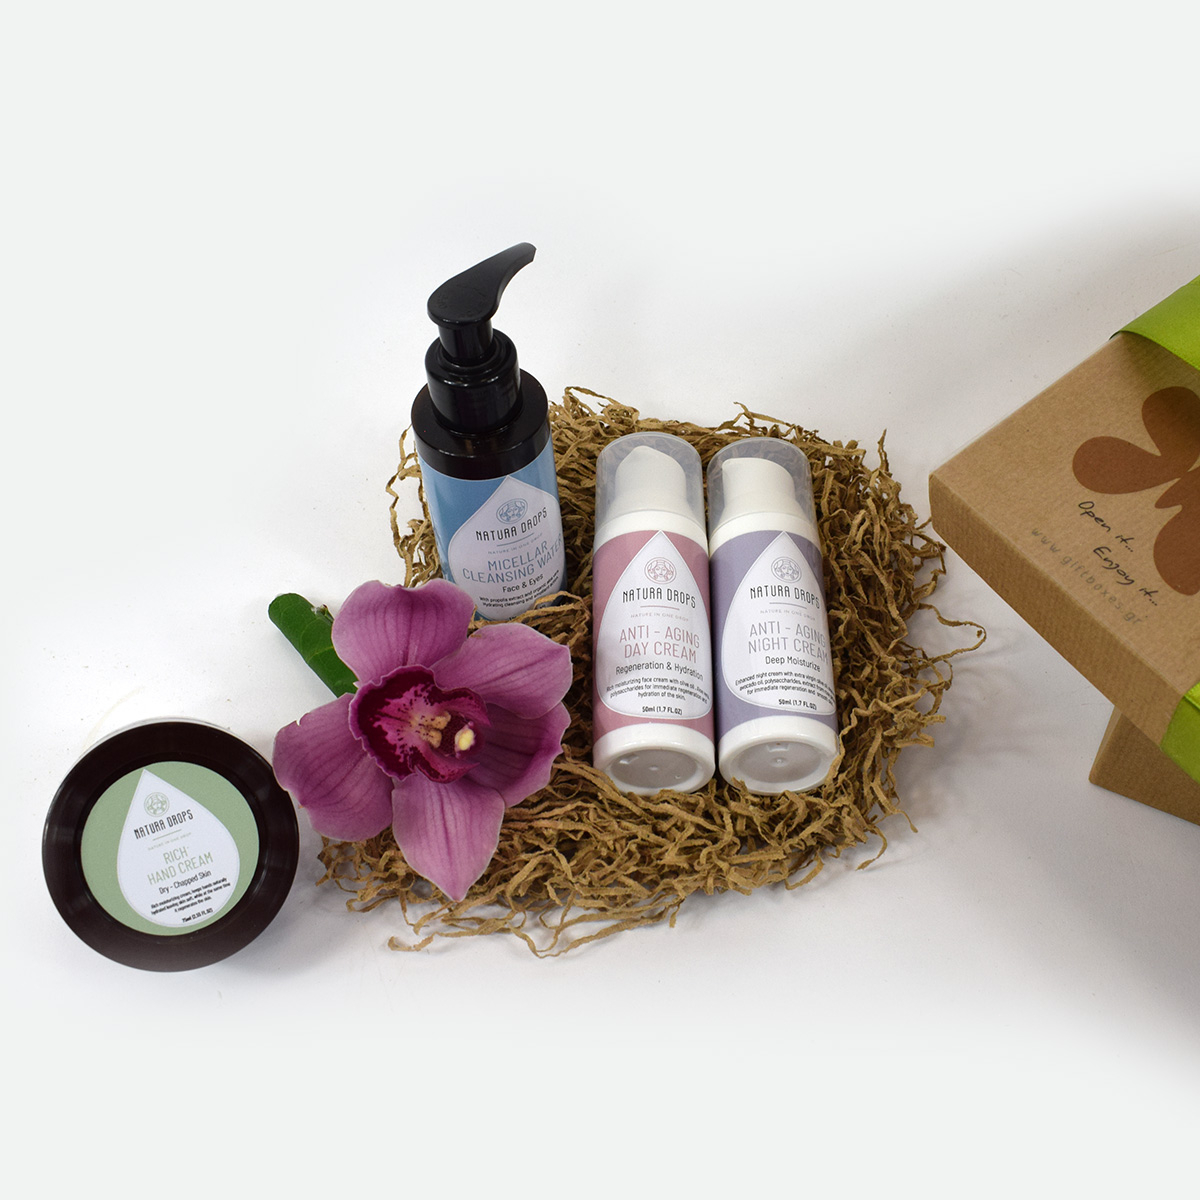 Hands And Face Cleansing & Anti-Aging Box